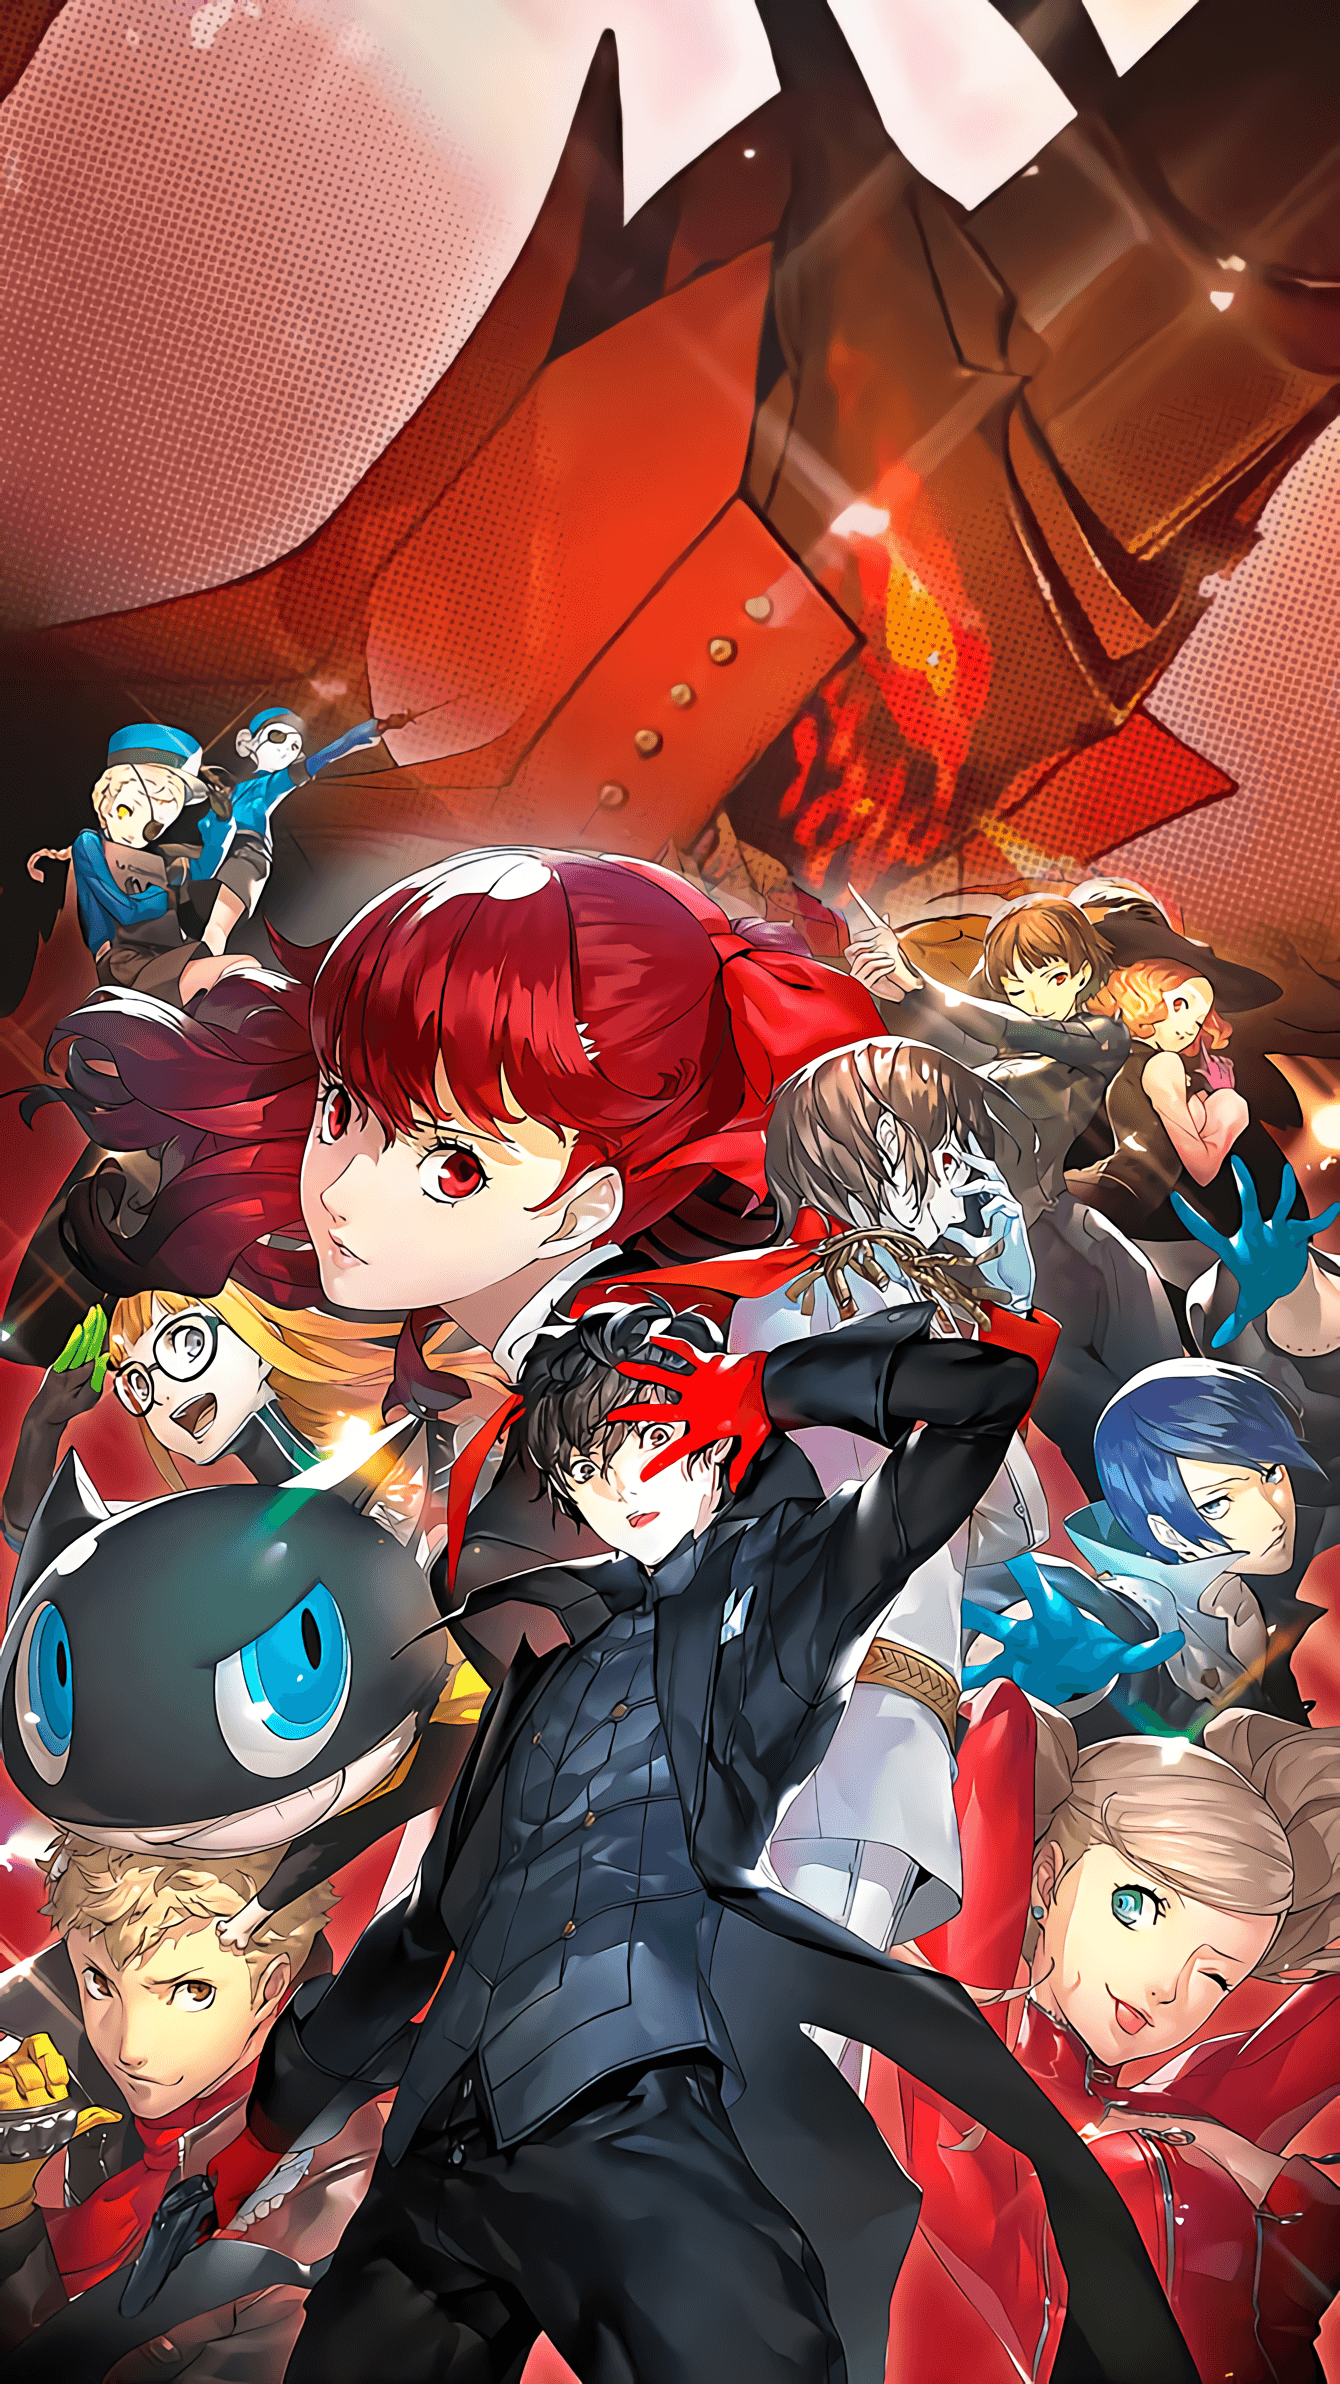 Here's a Persona 5 The Royal wallpaper! Upscaled to 1340x2384